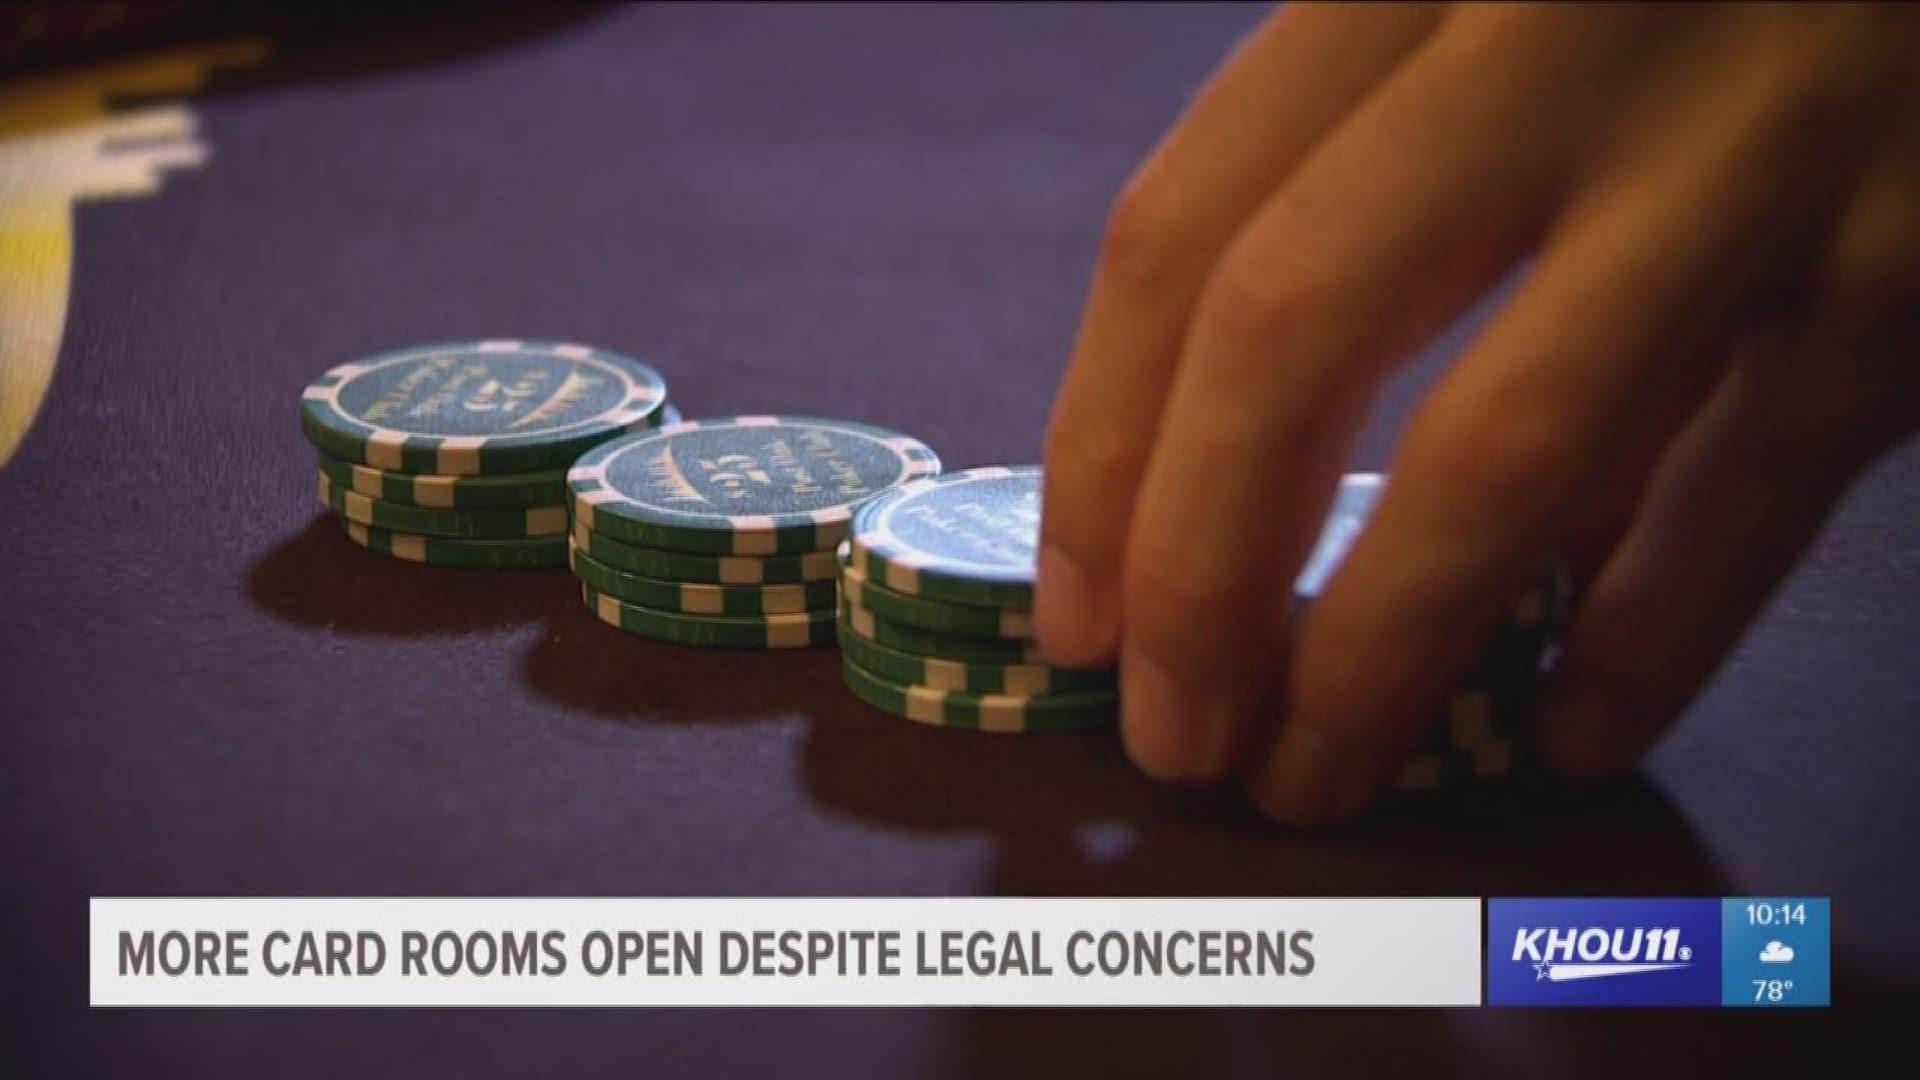 Gambling maybe illegal in Texas, but card rooms are popping up across the state and here in Houston. However, city officials say they won't issue anymore permits until Attorney General Ken Paxton weighs in this summer.